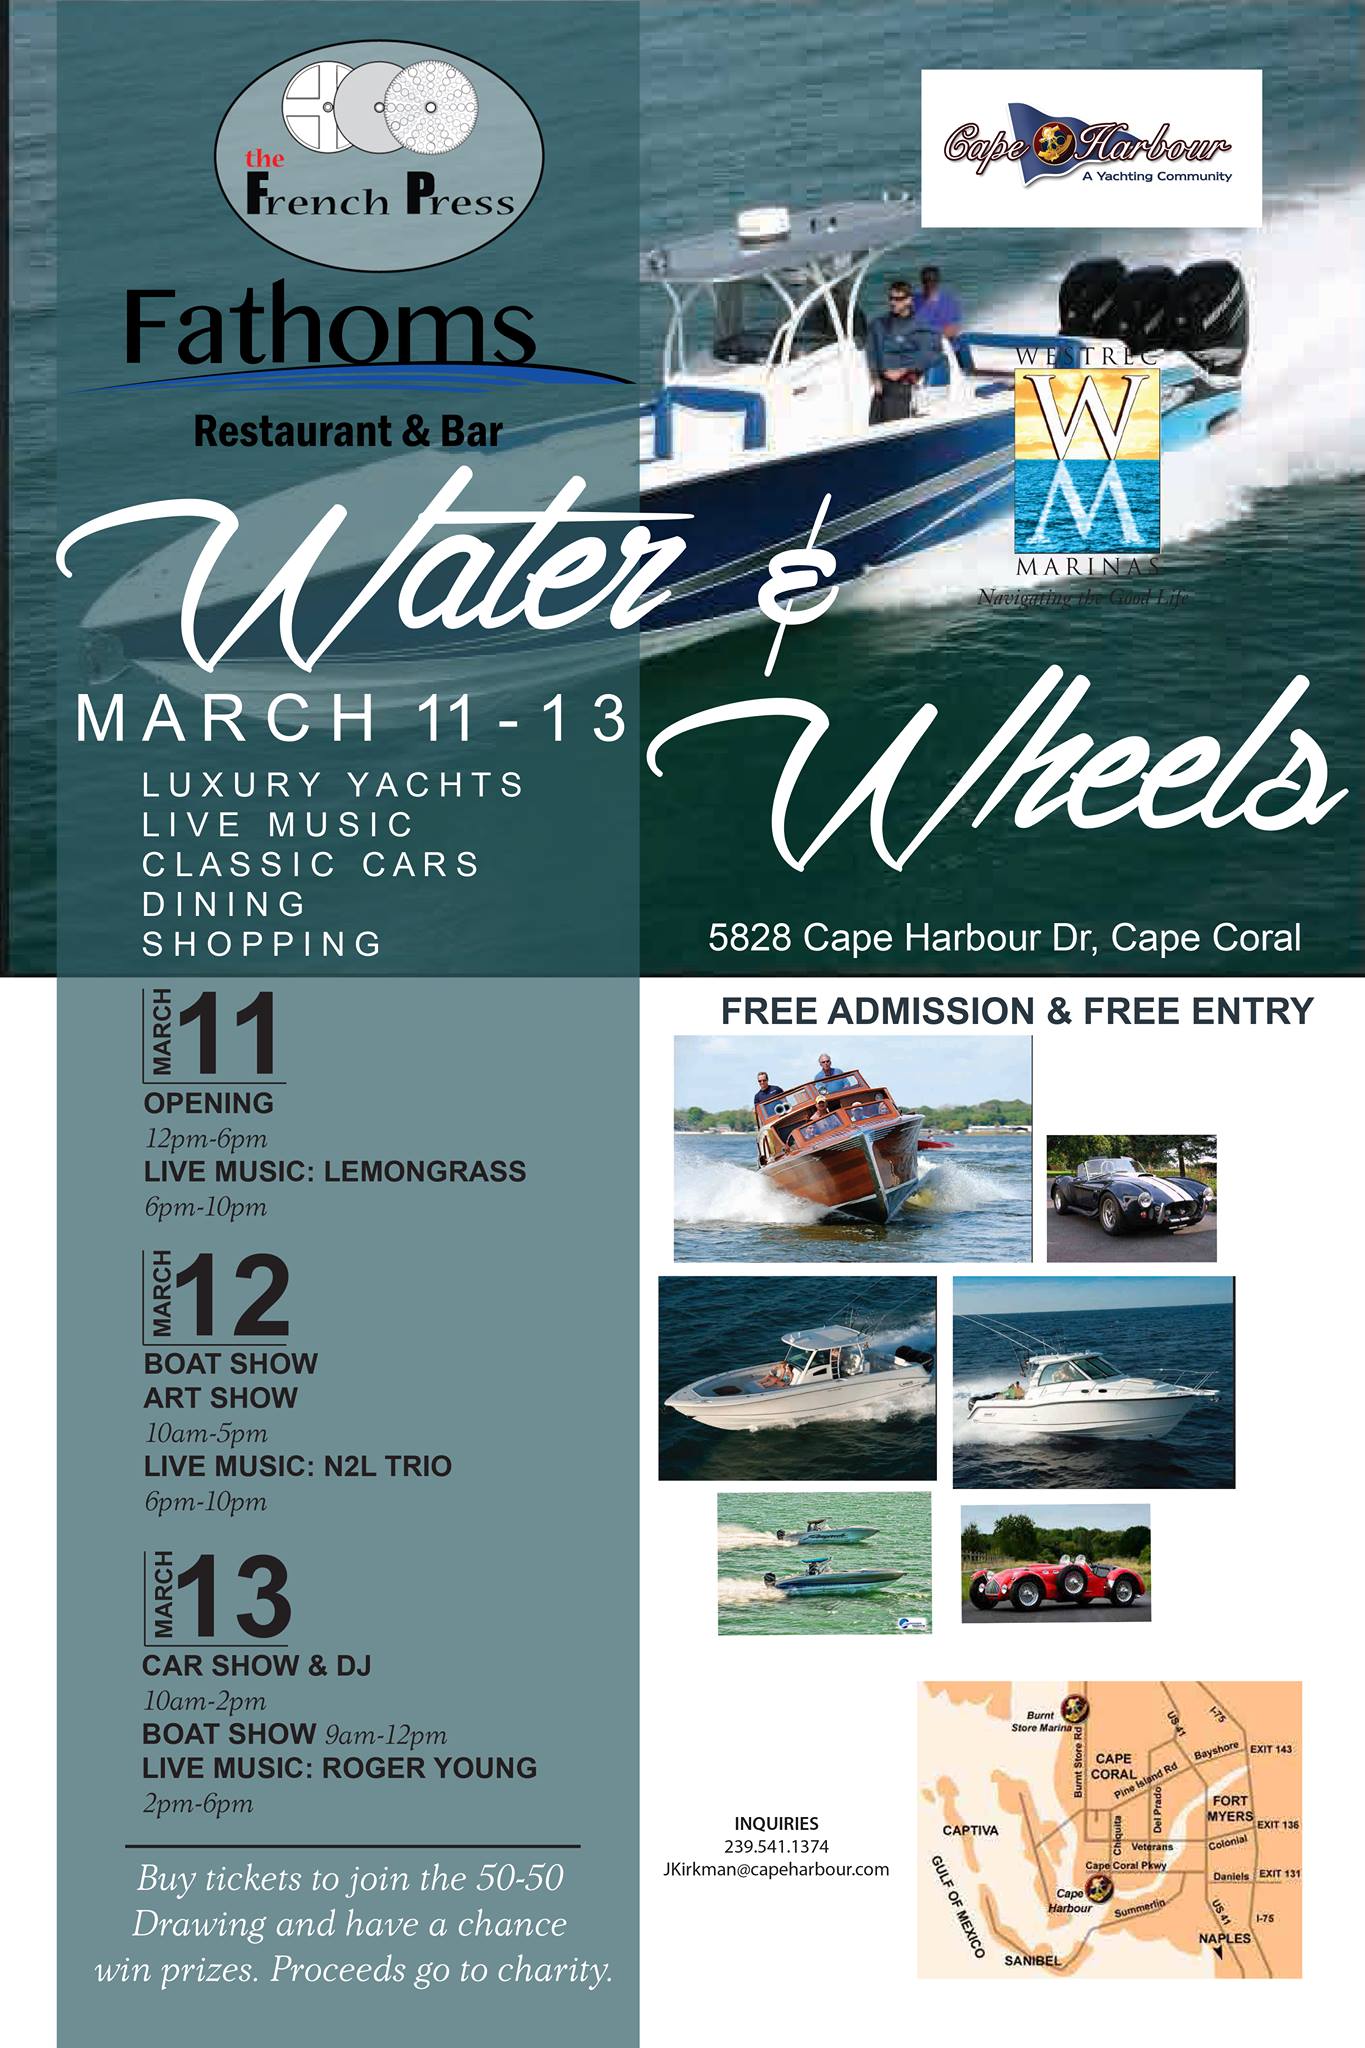 Water & Wheels will kick off on March 11 at Fathoms and the French Press in  Cape Harbour Marina